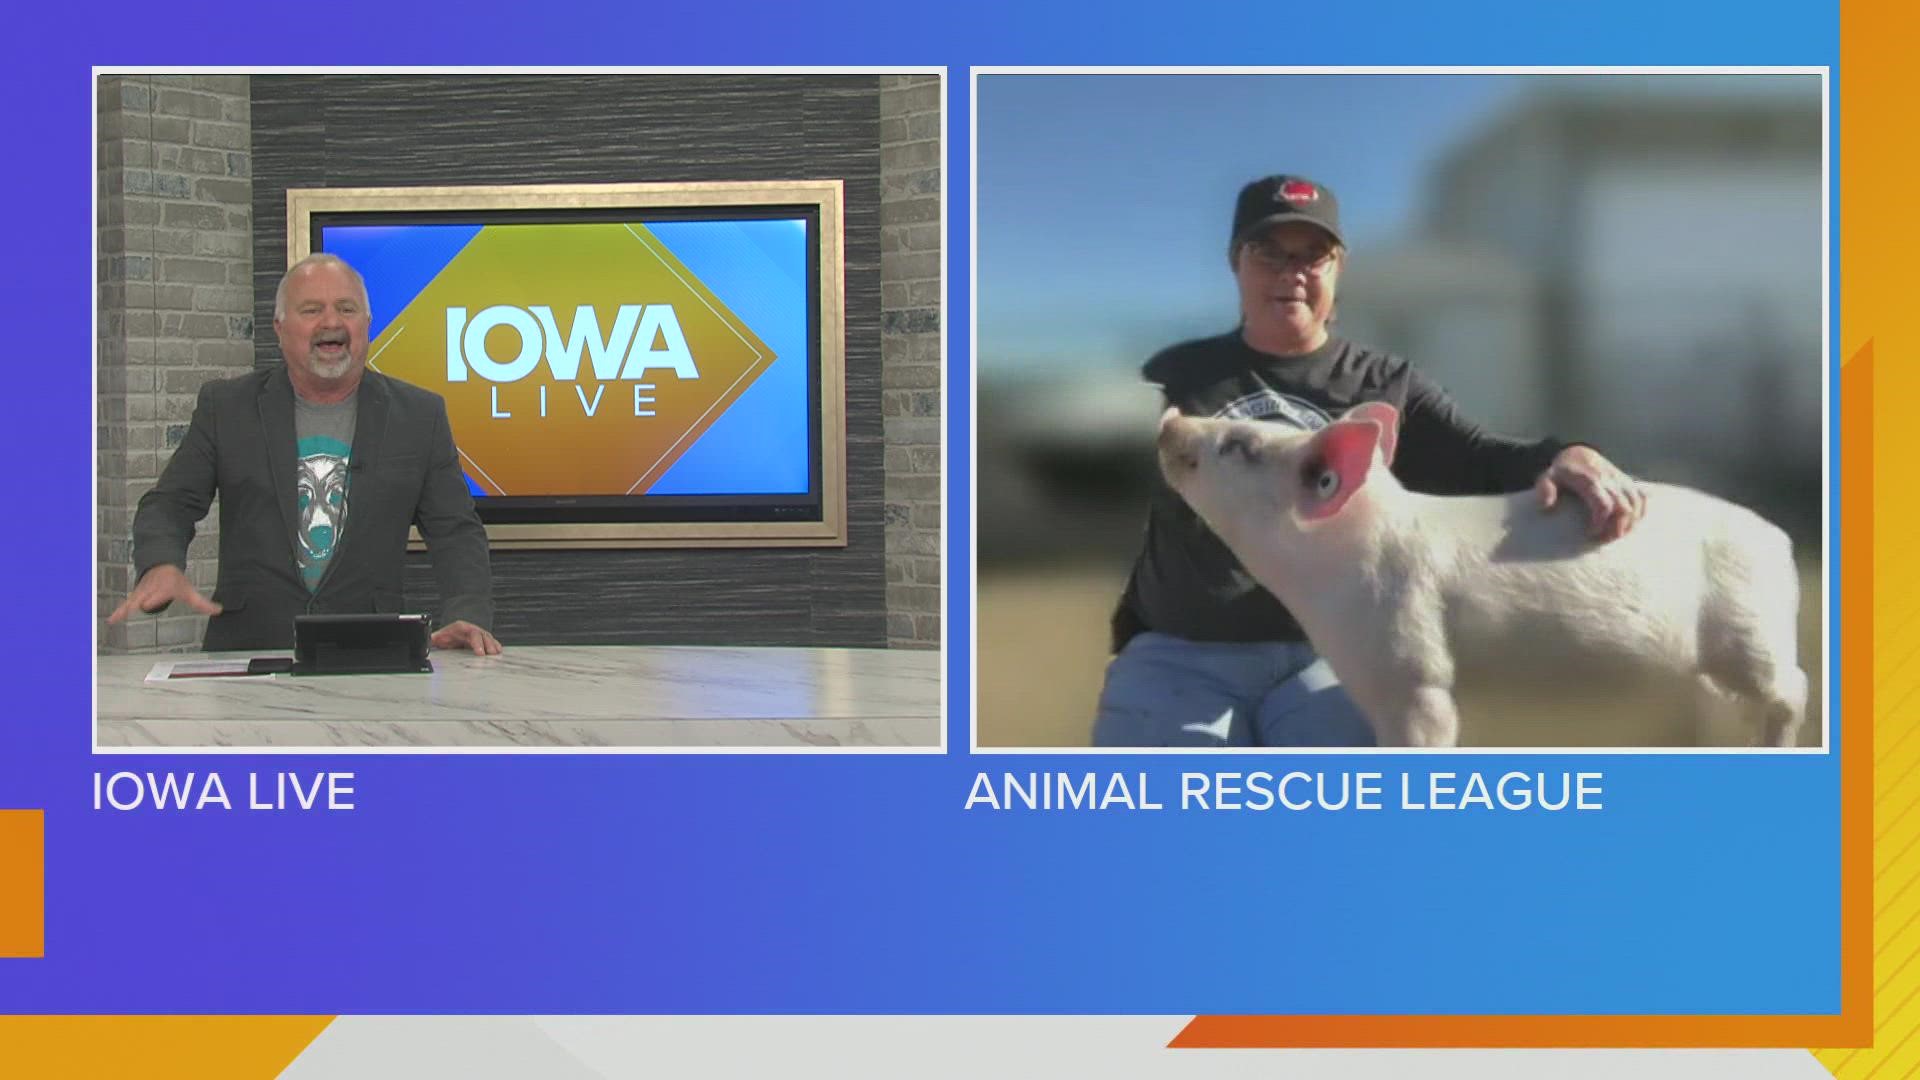 The Animal Rescue League of Iowa has 3 pigs available for adoption right now...two pot bellied pigs and Katrina the Farm Pig! Carrie Spain has details!